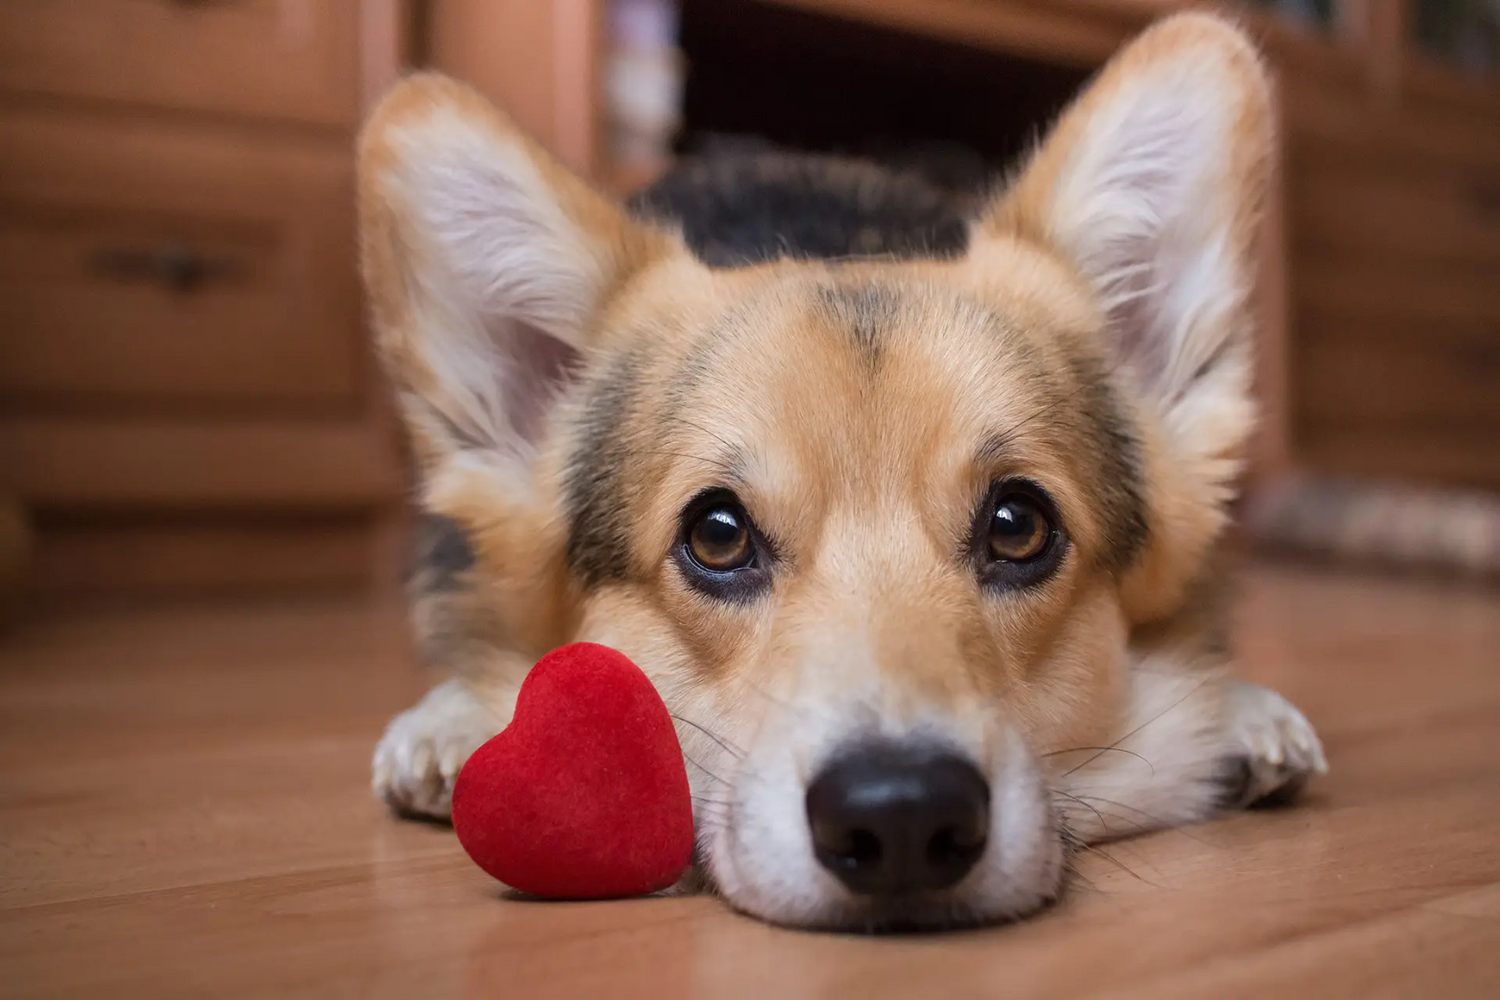 Close up of a dog with a red heart toy